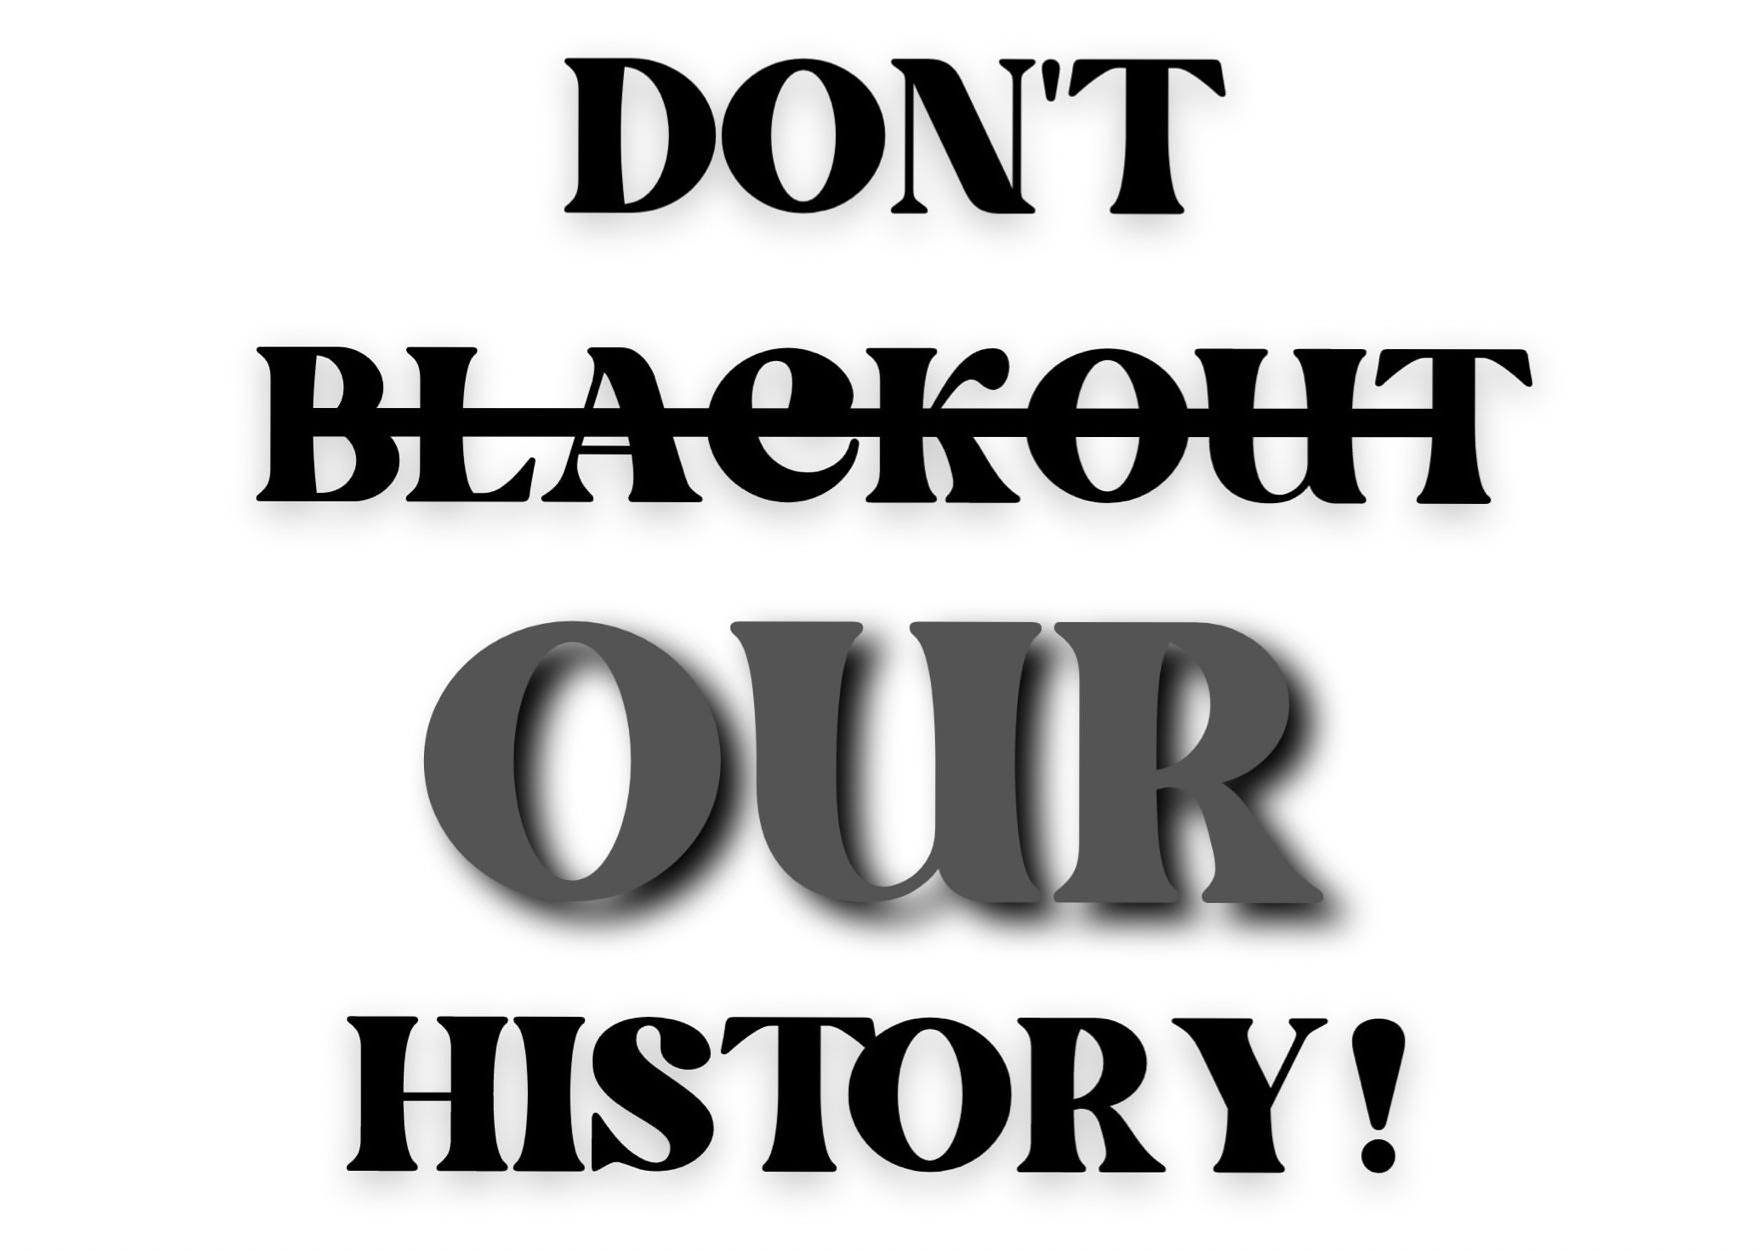  DON'T BLACKOUT OUR HISTORY!